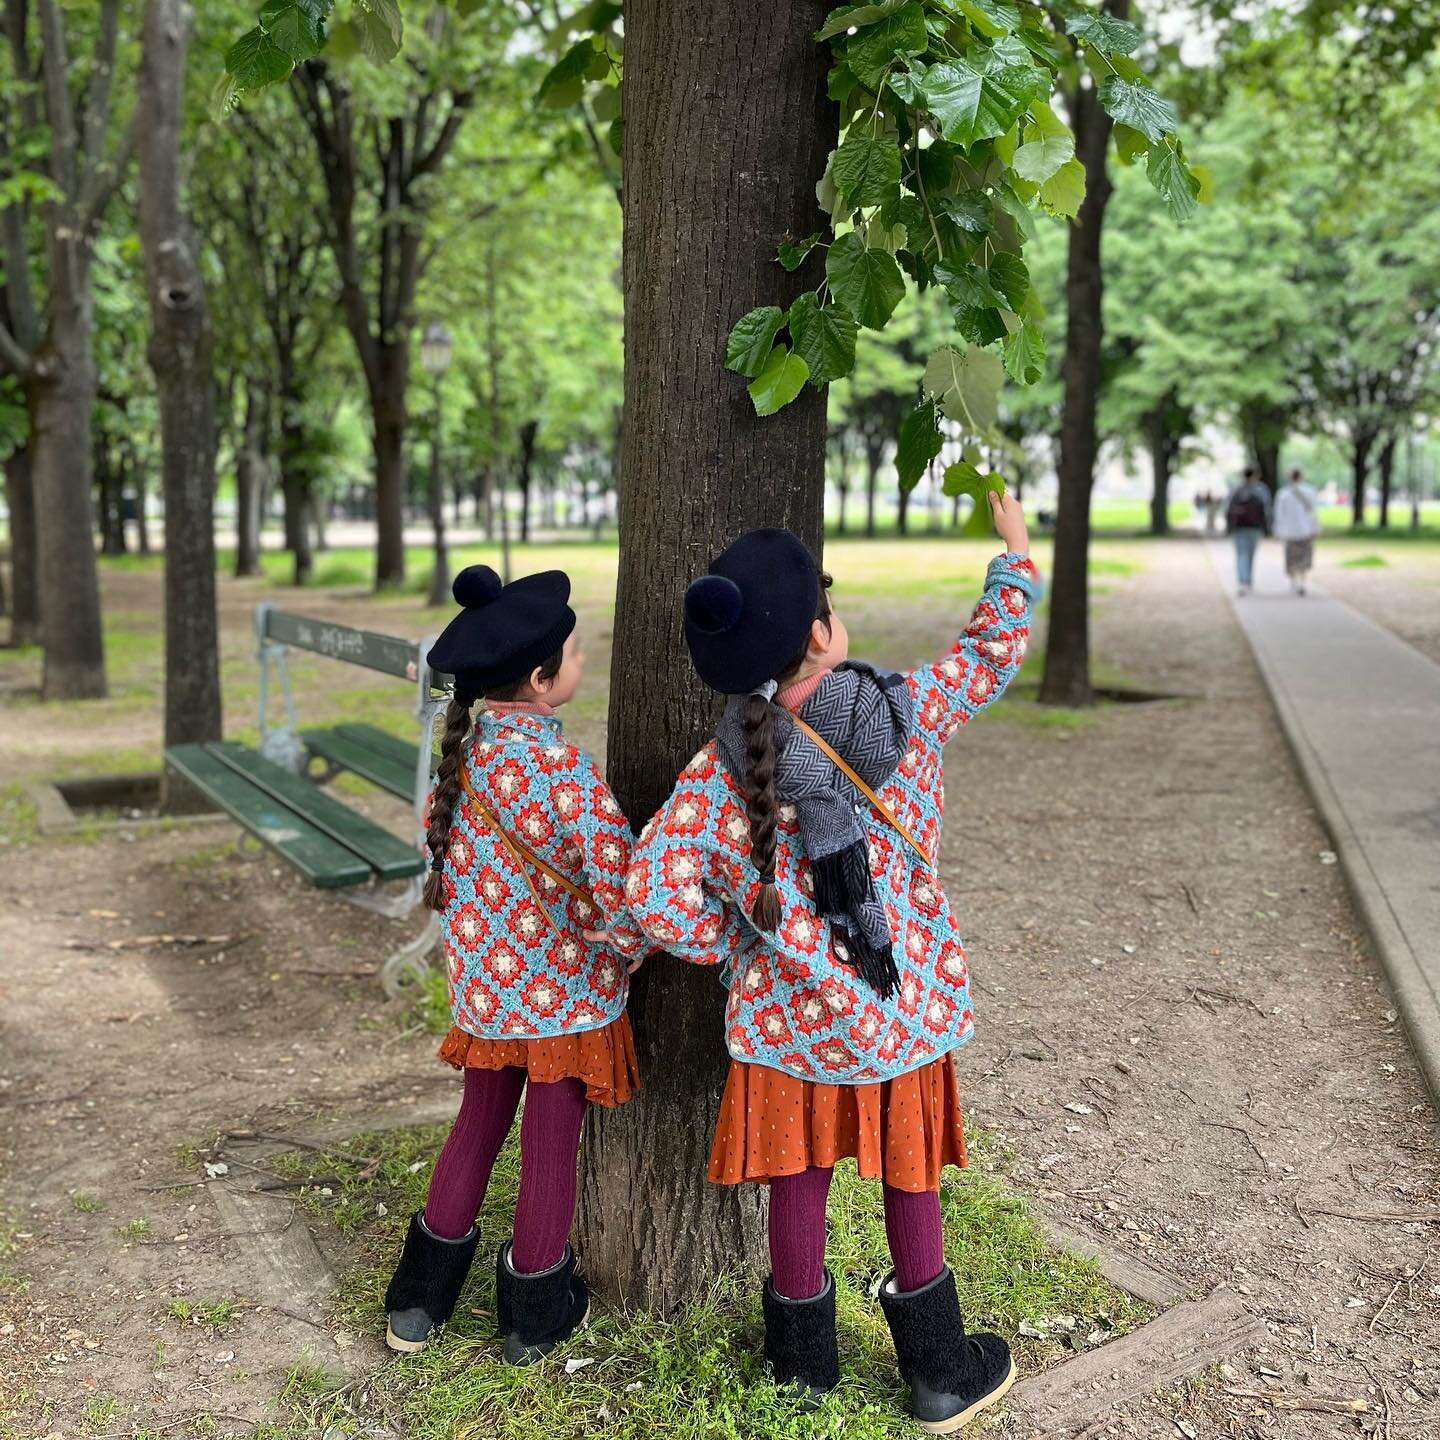 Painting in Jardin des Tuileries, window shopping on Rue Grenelle, live violin music while walking to the Mus&eacute;e d'Orsay, and a delicious picnic at one of our favorite parks 🎨 🧺 🎻 

#art #travelnowkids #violin #theadventuresofchiaraserafinaa